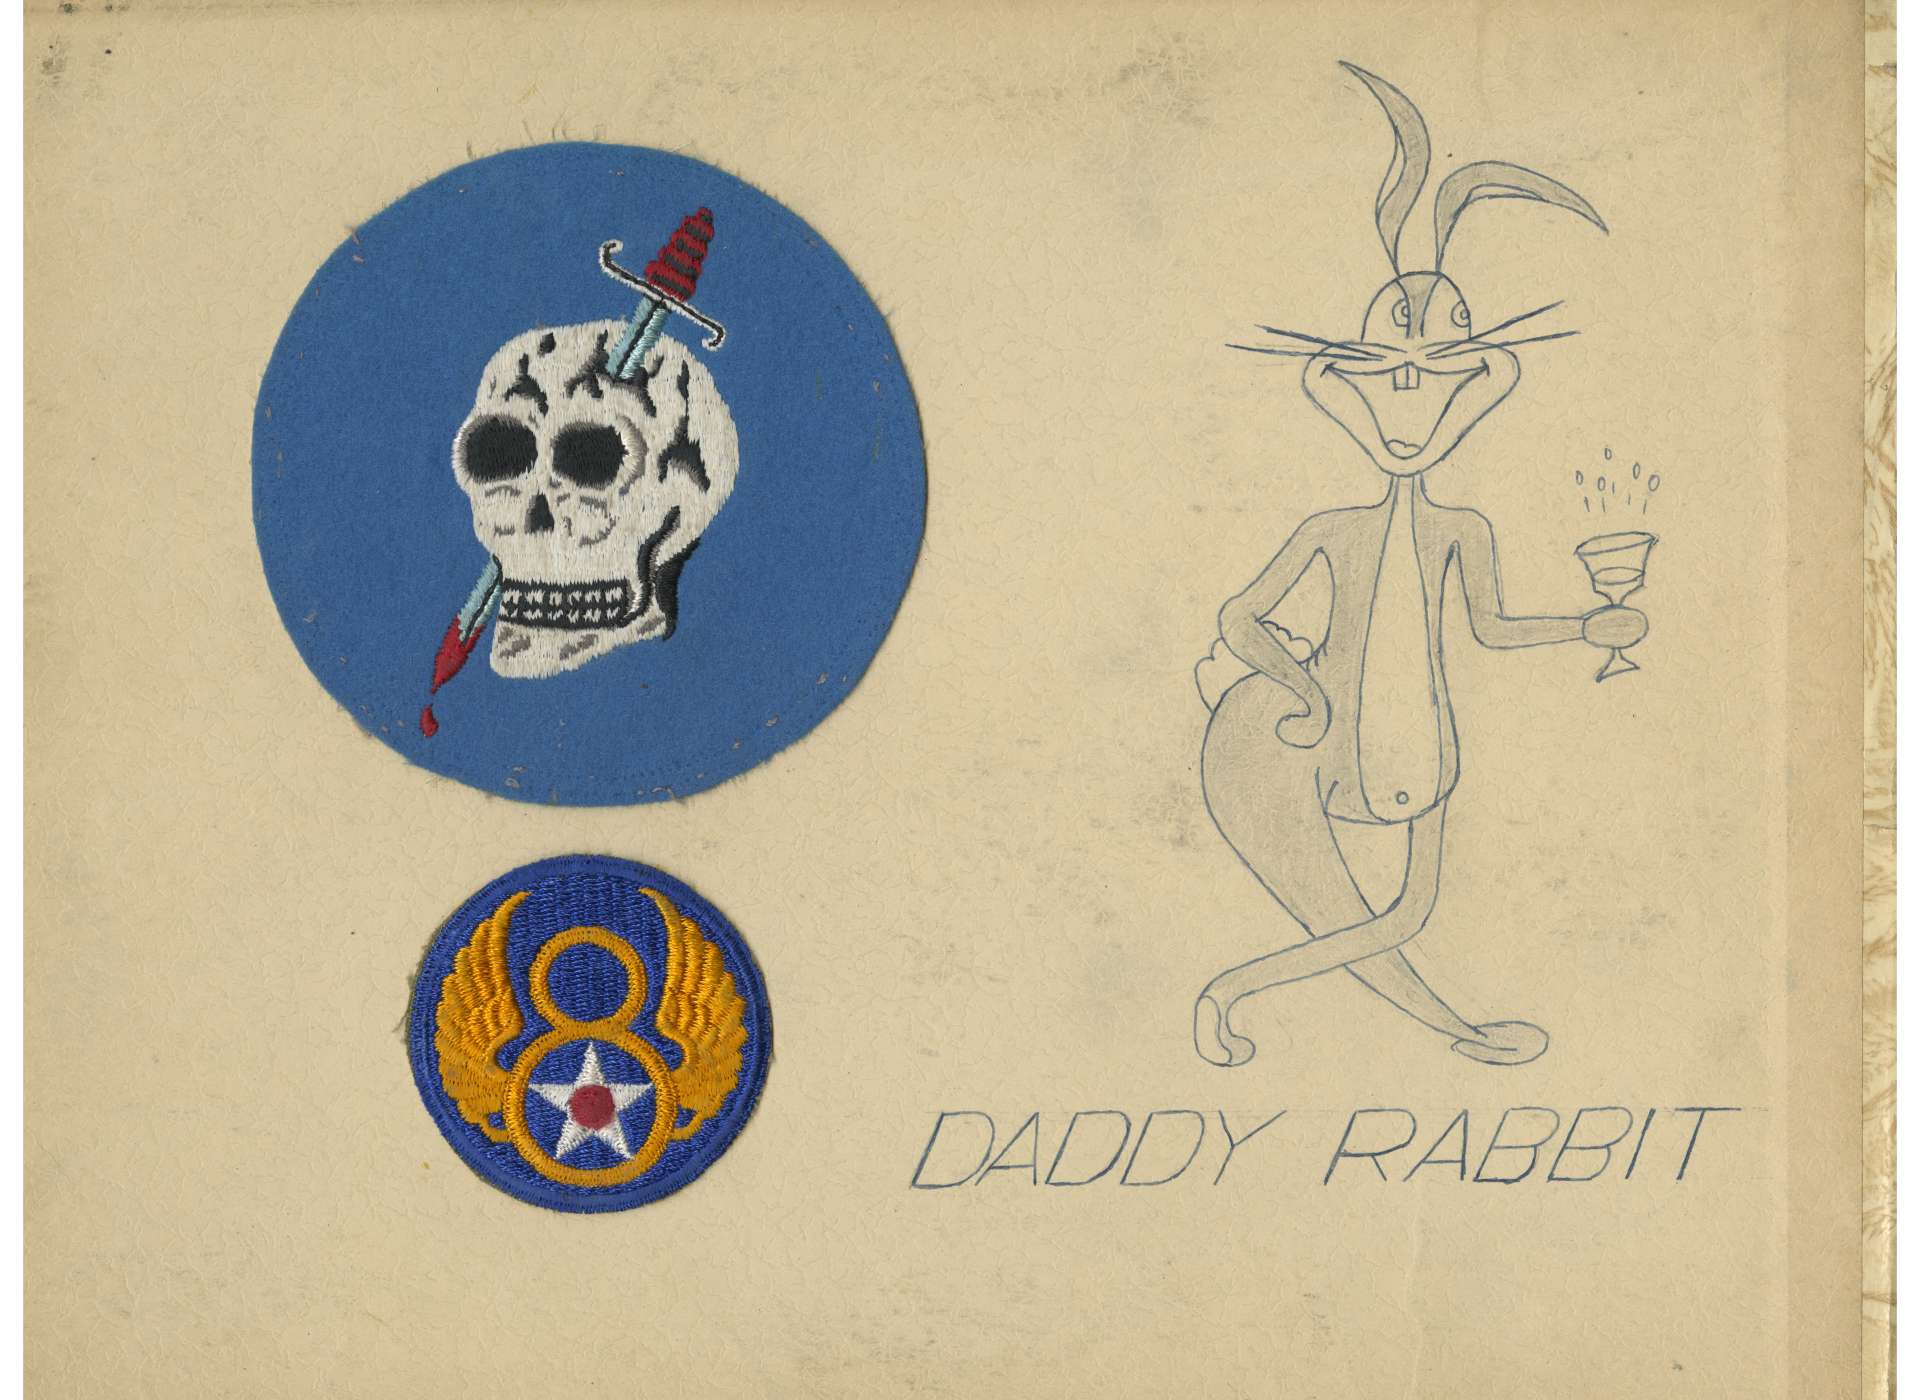 A page from Captain Charles K. Peters&#039;s scrapbook. Peters&#039;s 363rd Fighter Squadron and 8th Air Force patch are pasted inside, along with a sketch of Daddy Rabbit&#039;s nose art.